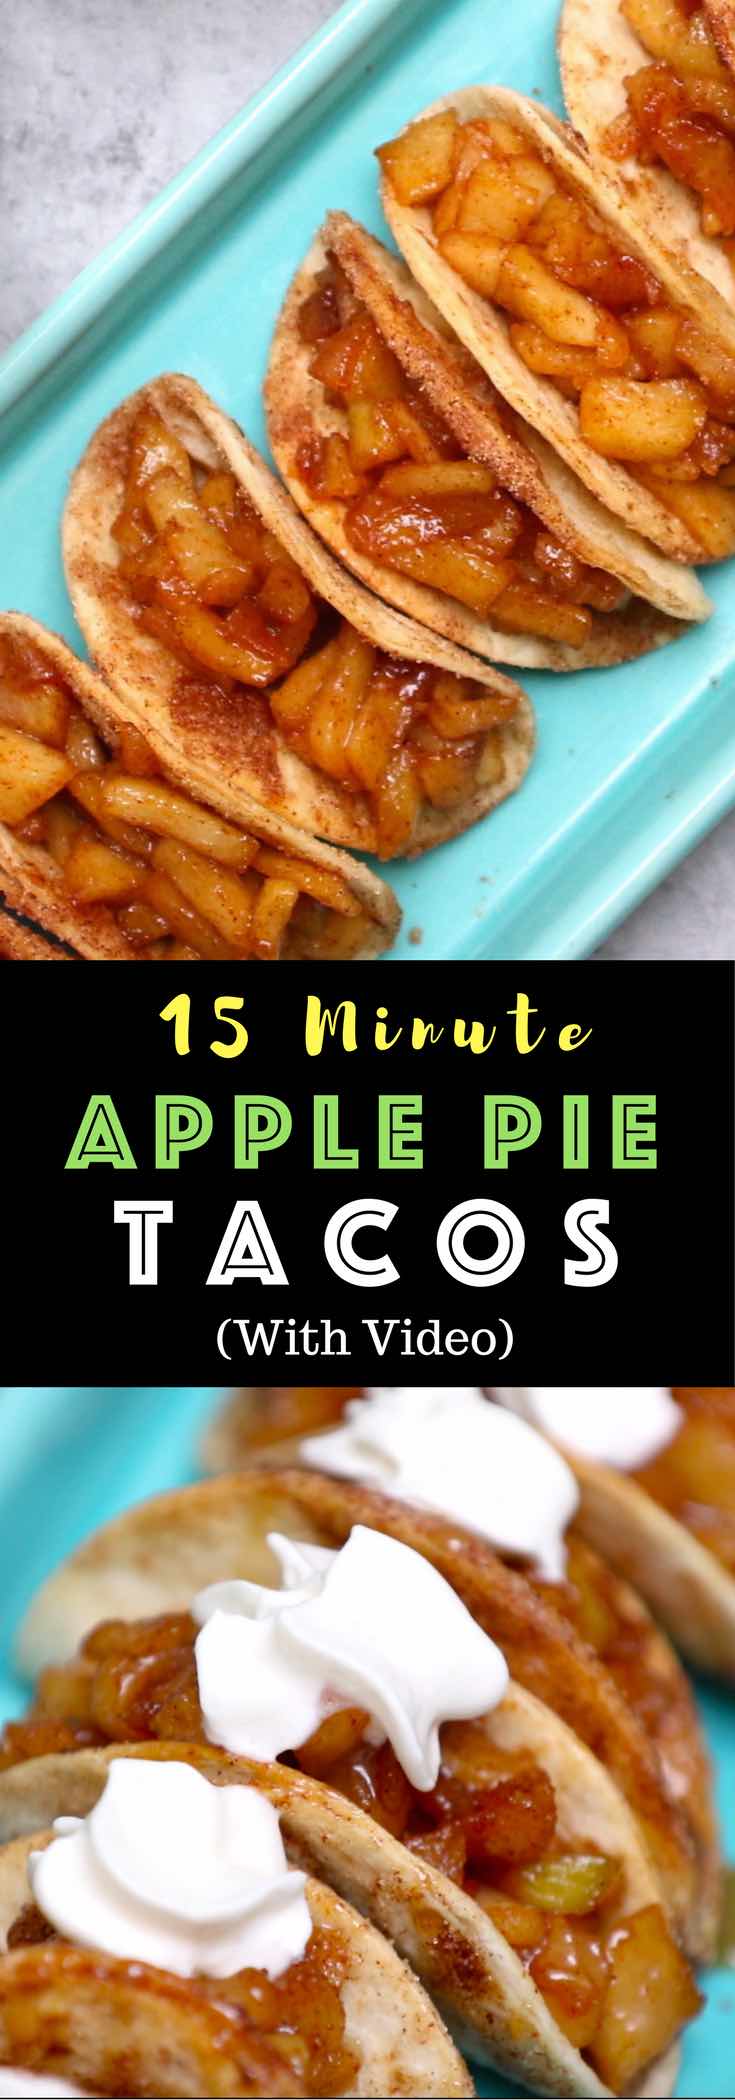 Baked Apple Pie Tacos – delicious cinnamon sugary apple filling in a crispy and sweet taco, drizzled with caramel sauce, and then topped with whipped cream! This easy apple dessert comes together in 20 minutes with a few simple ingredients: Flour Tortillas, butter, cinnamon, sugar, apples, lemon, caramel sauce and whipped cream. Perfect for parties, potlucks and holidays including Thanksgiving. #applepie